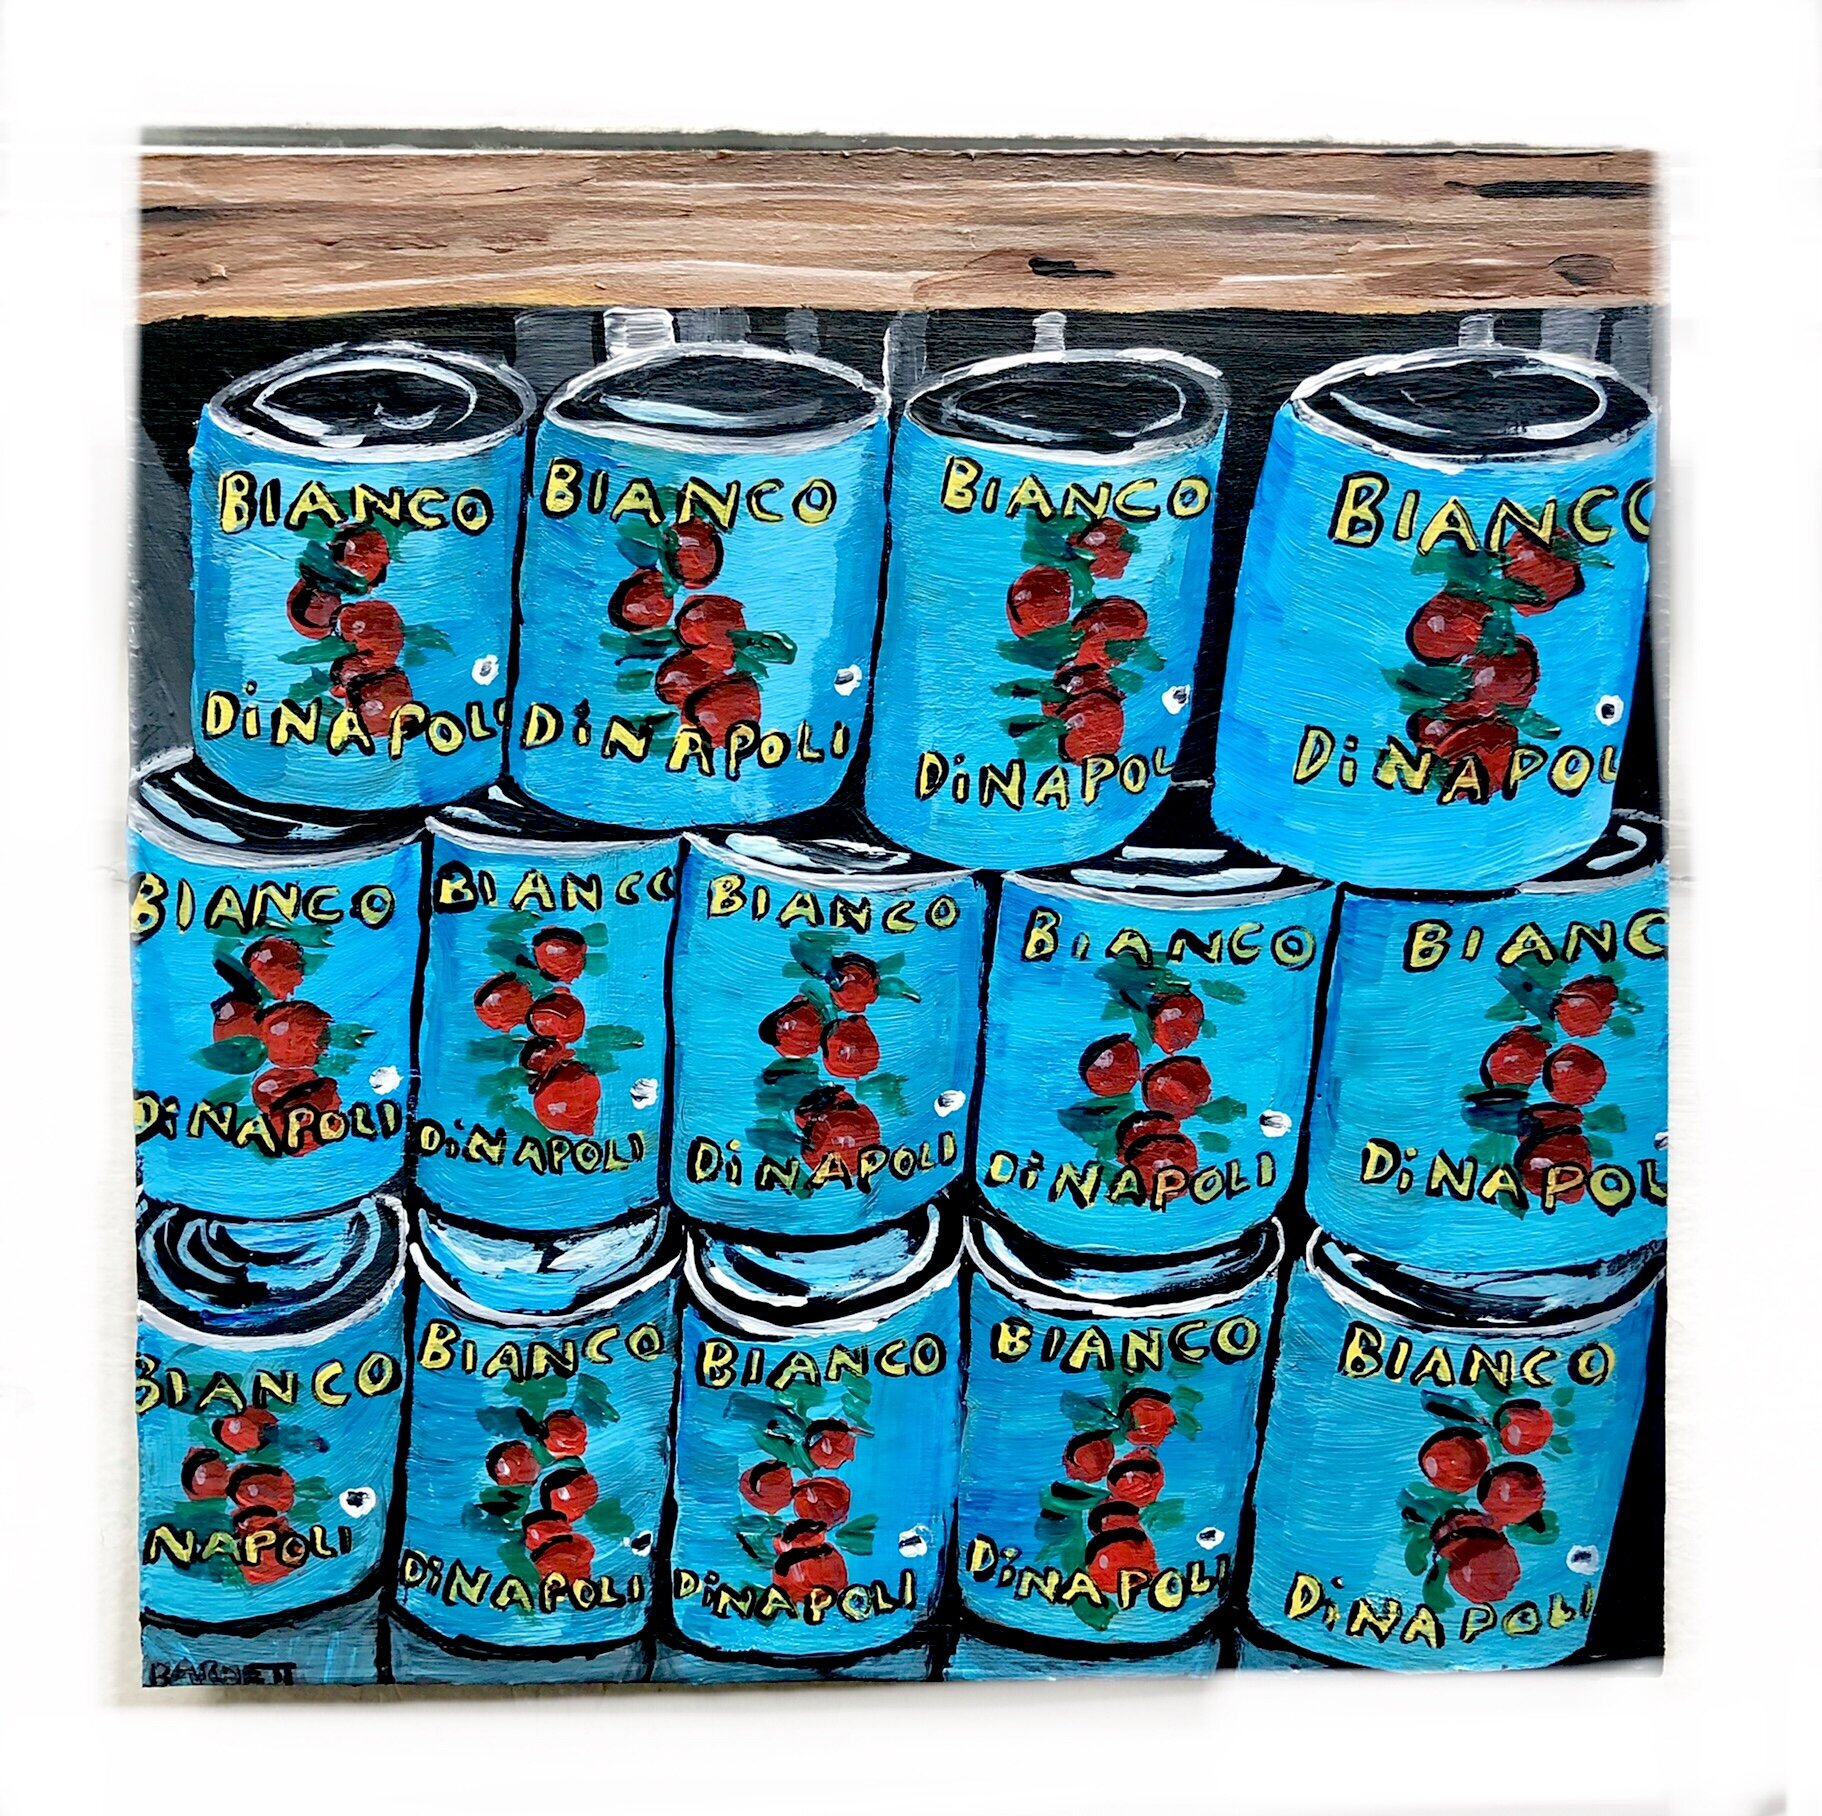 Blue cans